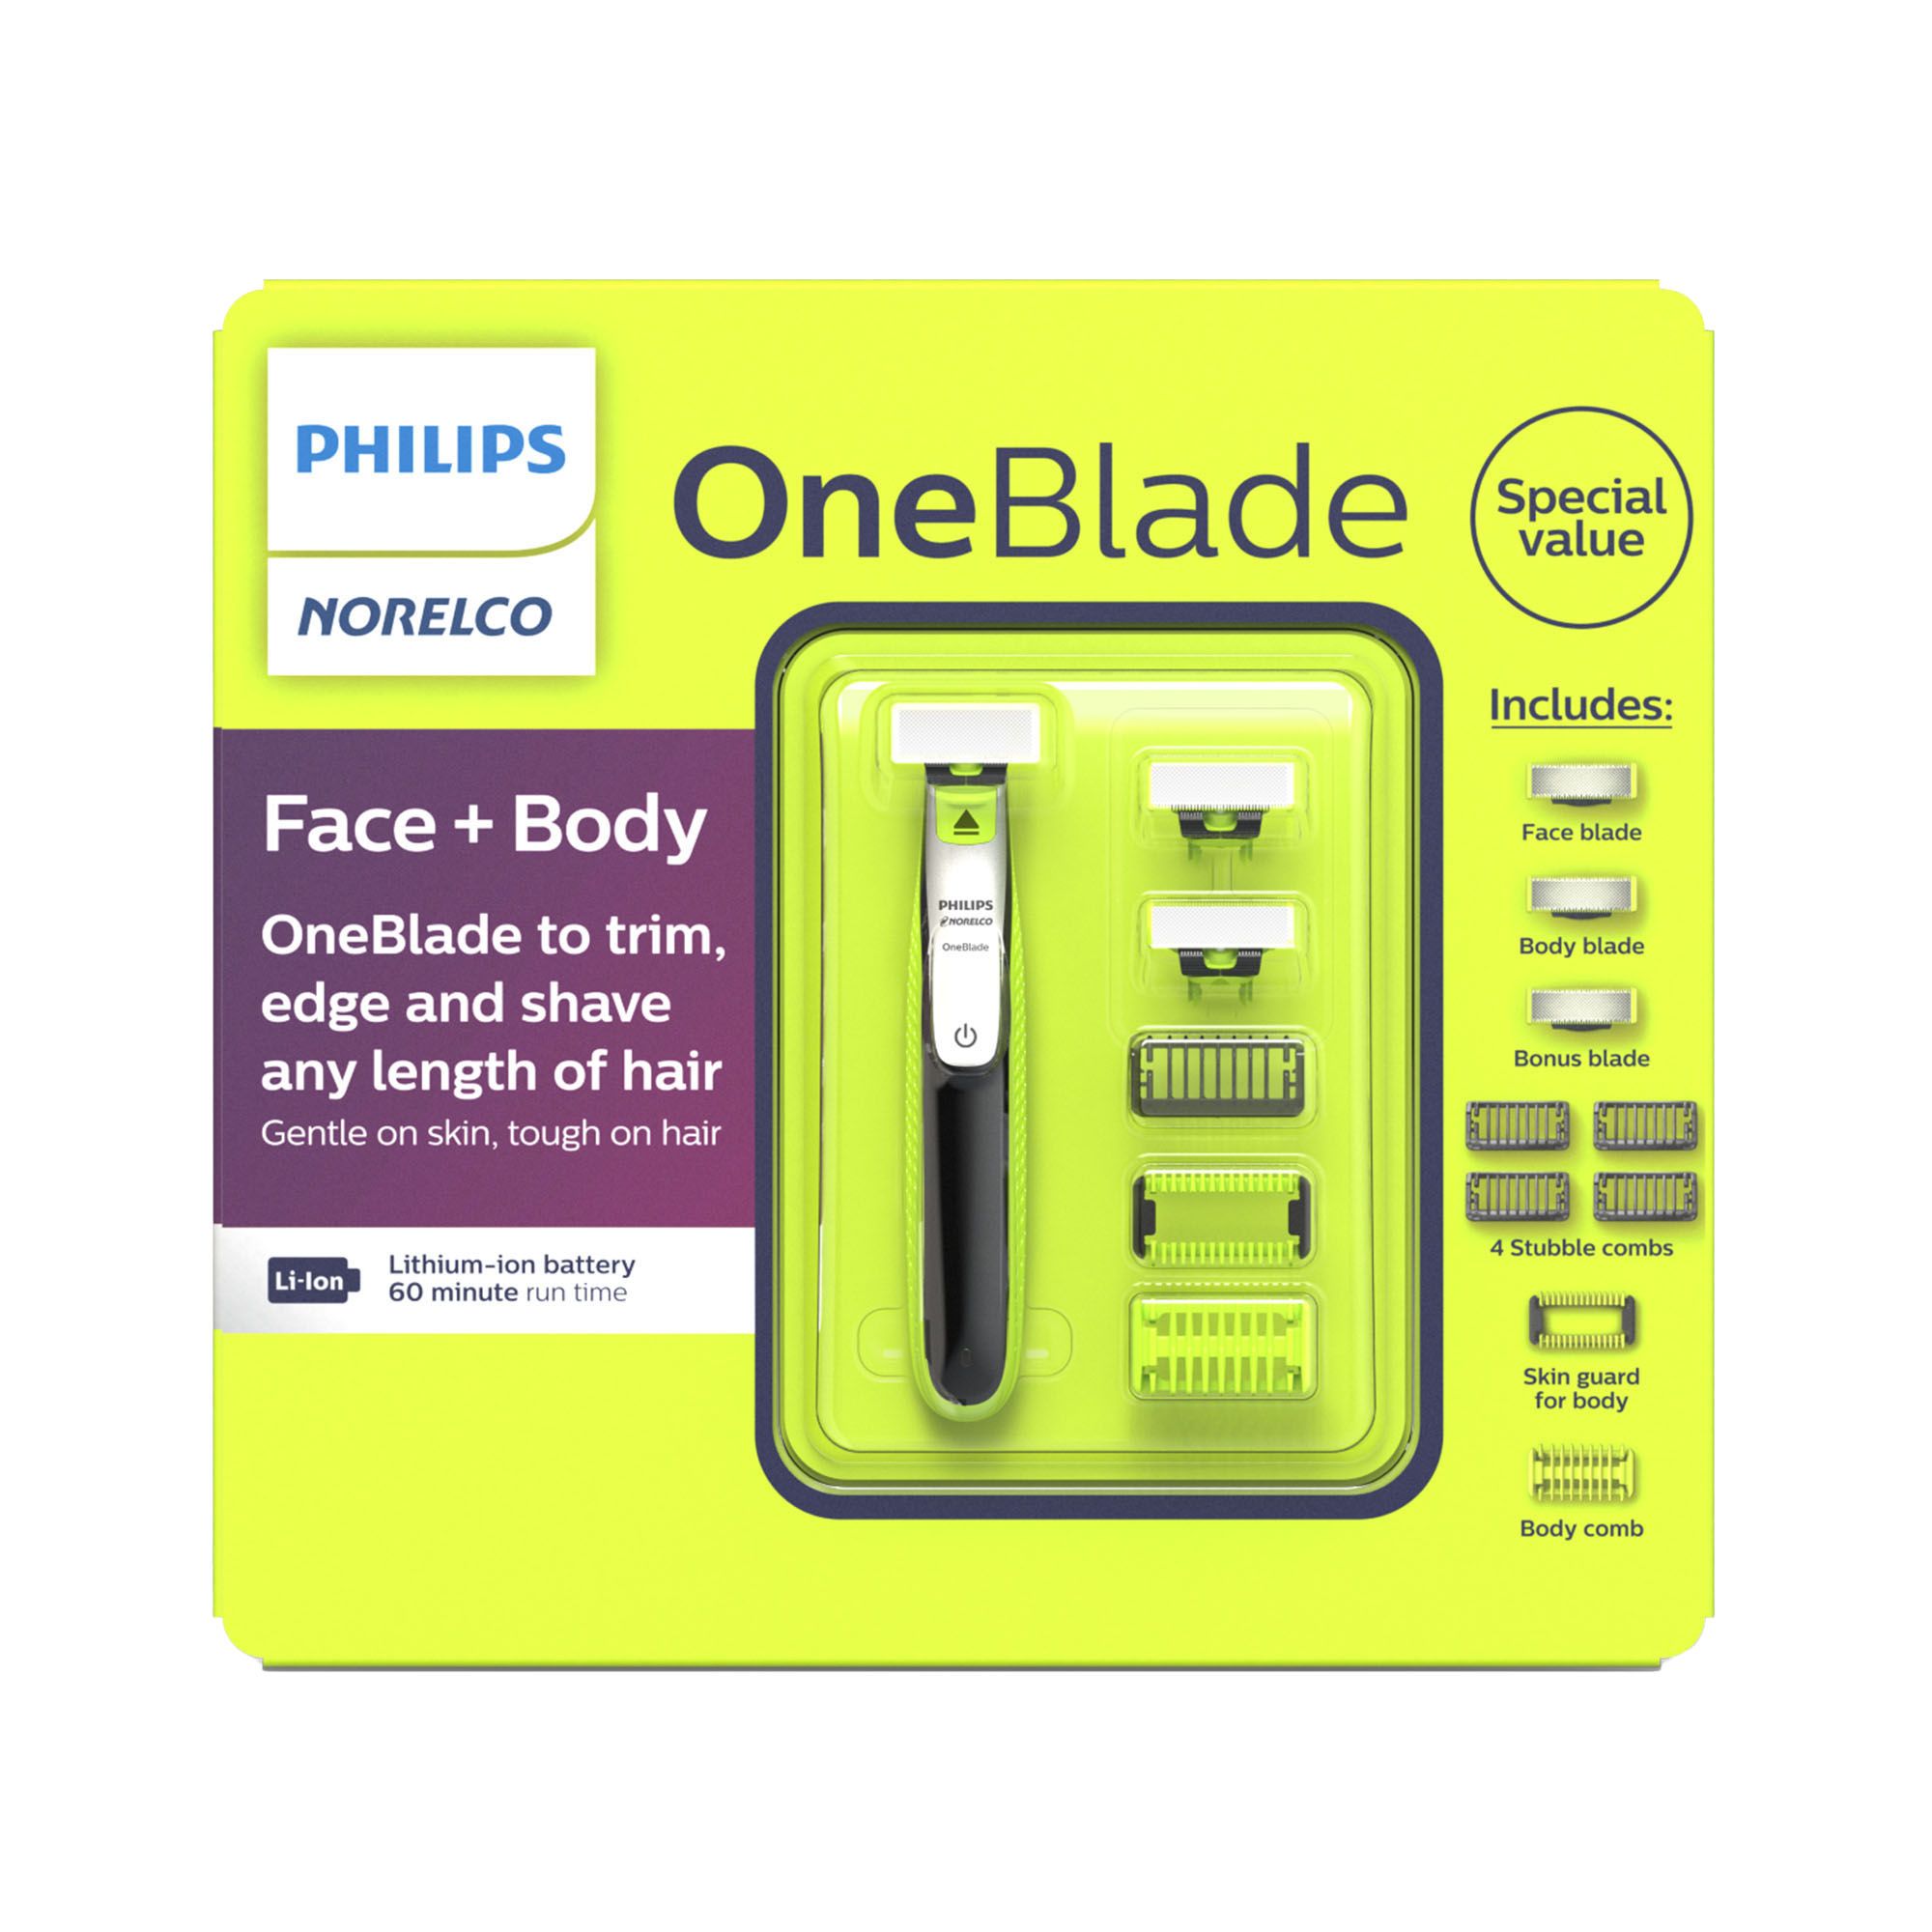 philips one blade specifications